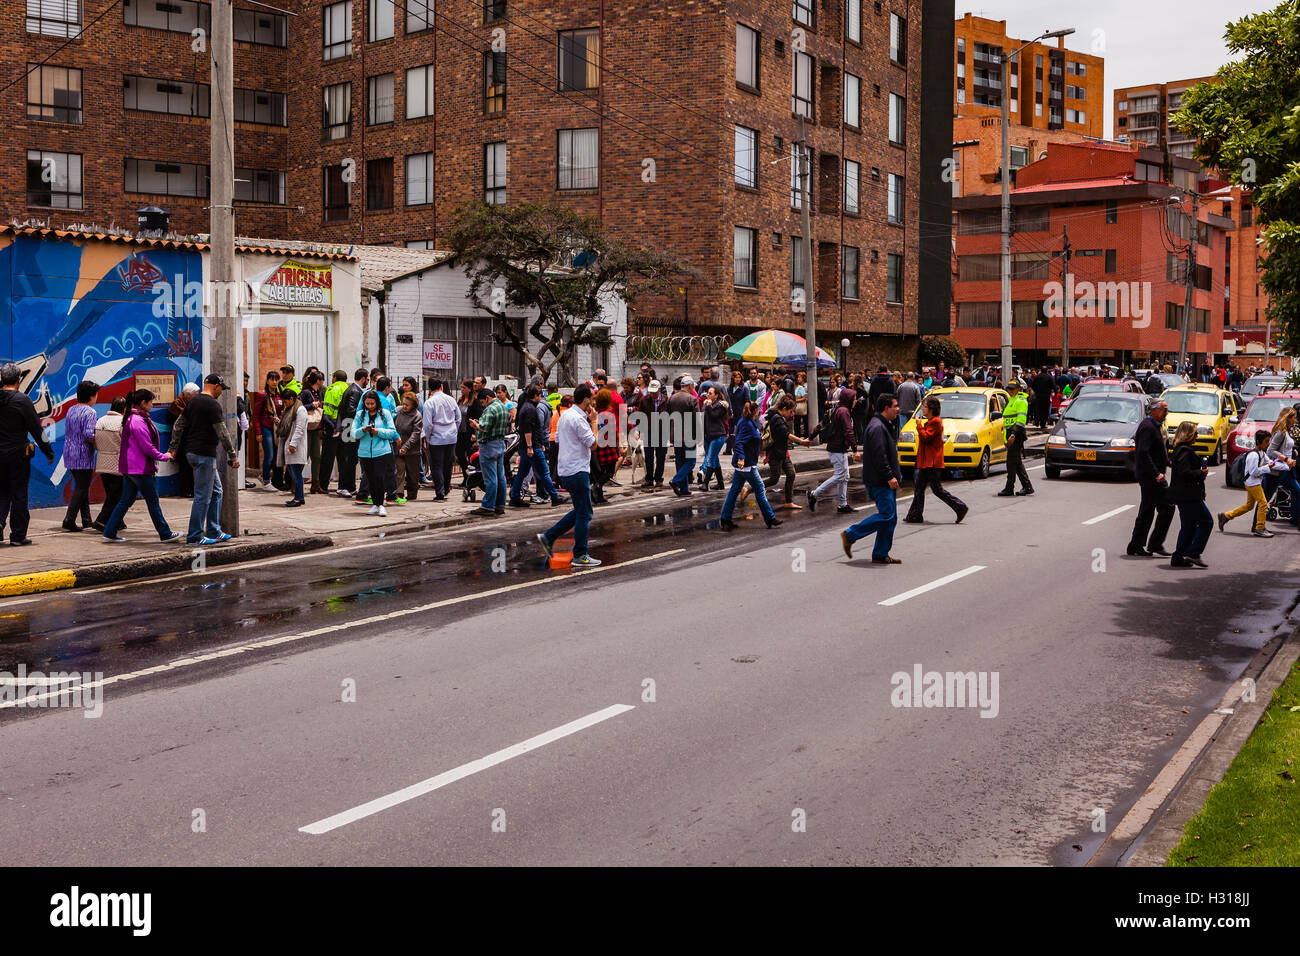 Bogota, Colombia - October 02, 2016: Voters queue up to enter a polling station on Carrera 9, in the Andean capital city of Bogota, in the South American country of Colombia, to vote on the historic Plebiscite on the peace process with FARC. To the left behind the people is part of a mural painted in the bright colours of Latin America, dedicated to the Peace Process. A policeman has stopped the traffic to help people cross the road safely. Stock Photo